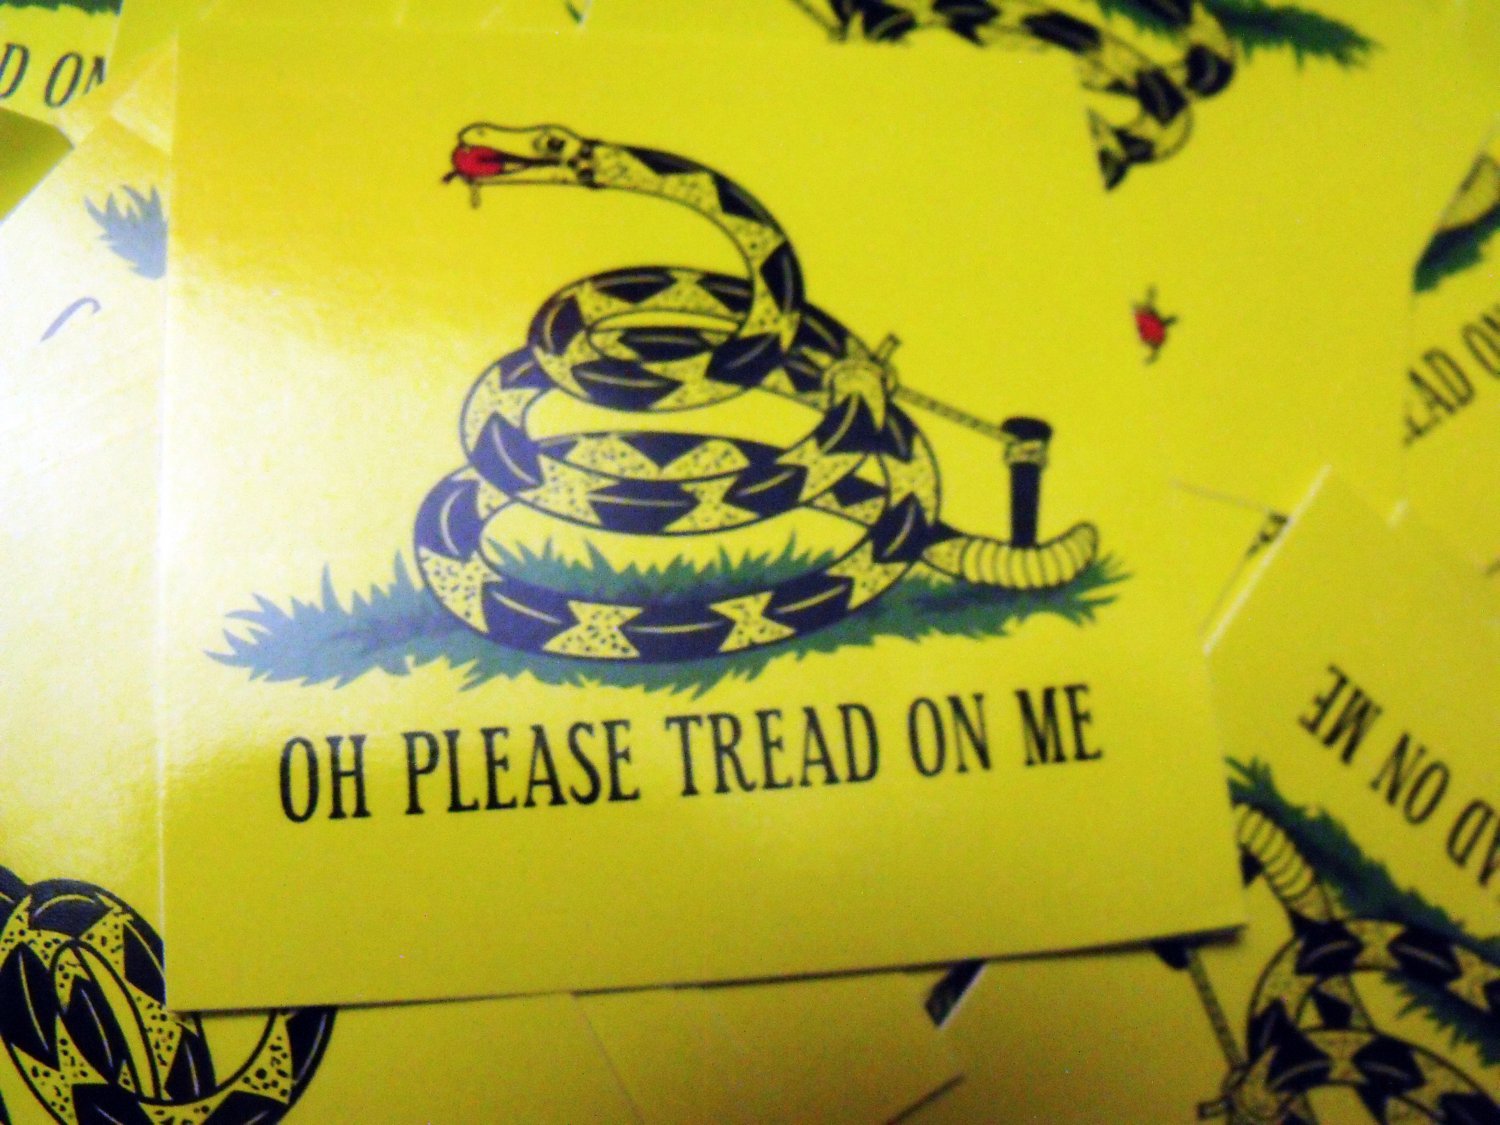 300 OH PLeASE TReAD ON ME 2.5" x 2.5" stickers